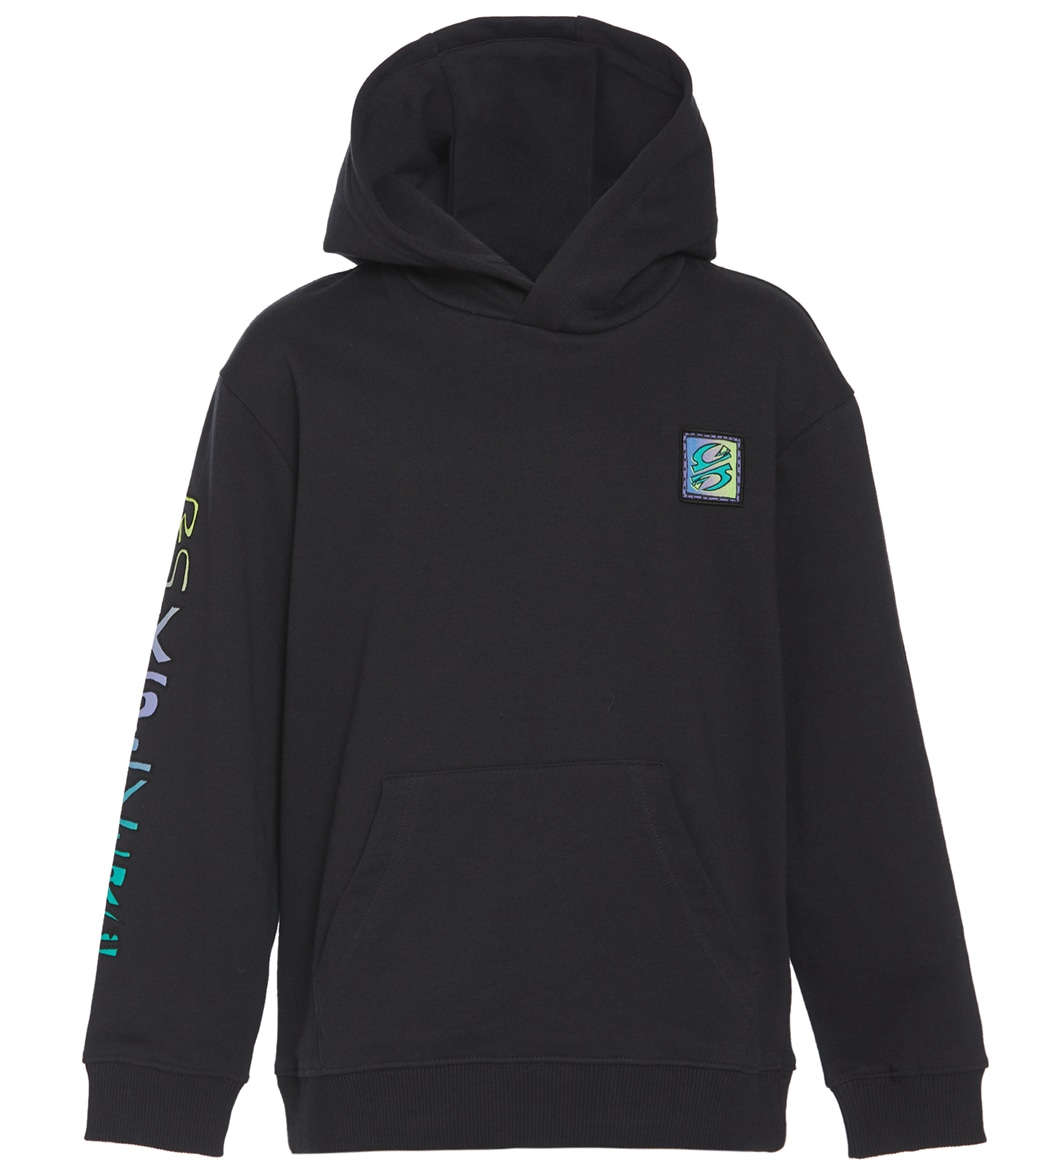 Quiksilver Boys' Radical Times Hoodie Big Kid - Black Large/14 Cotton/Polyester - Swimoutlet.com